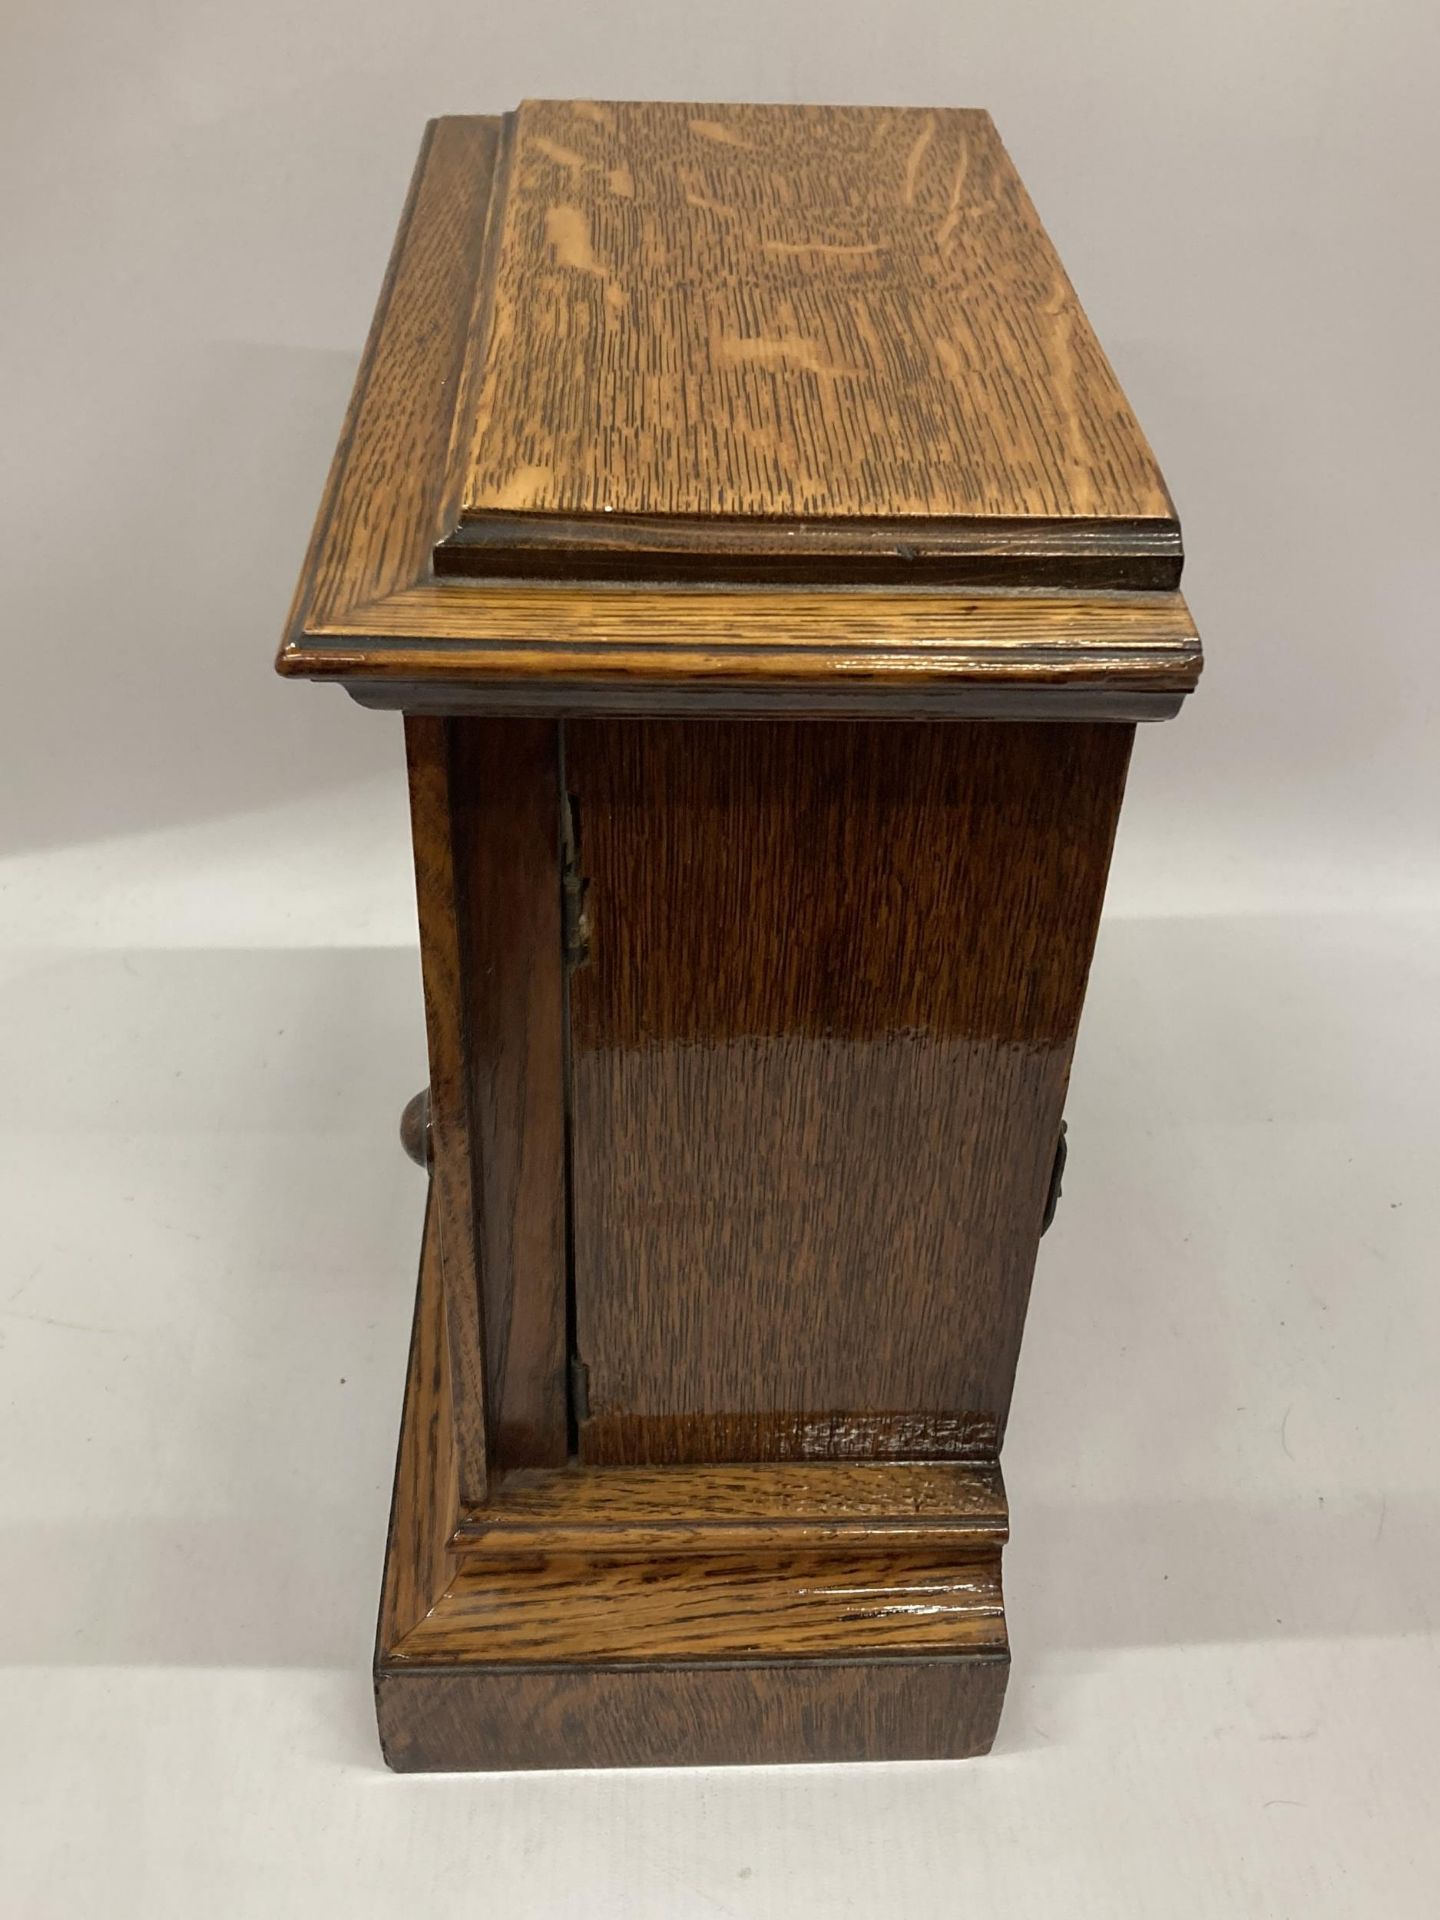 AN EARLY 20TH CENTURY JUNGHANS, GERMAN, OAK CASED CHIMING MANTLE CLOCK WITH KEY - Image 2 of 5